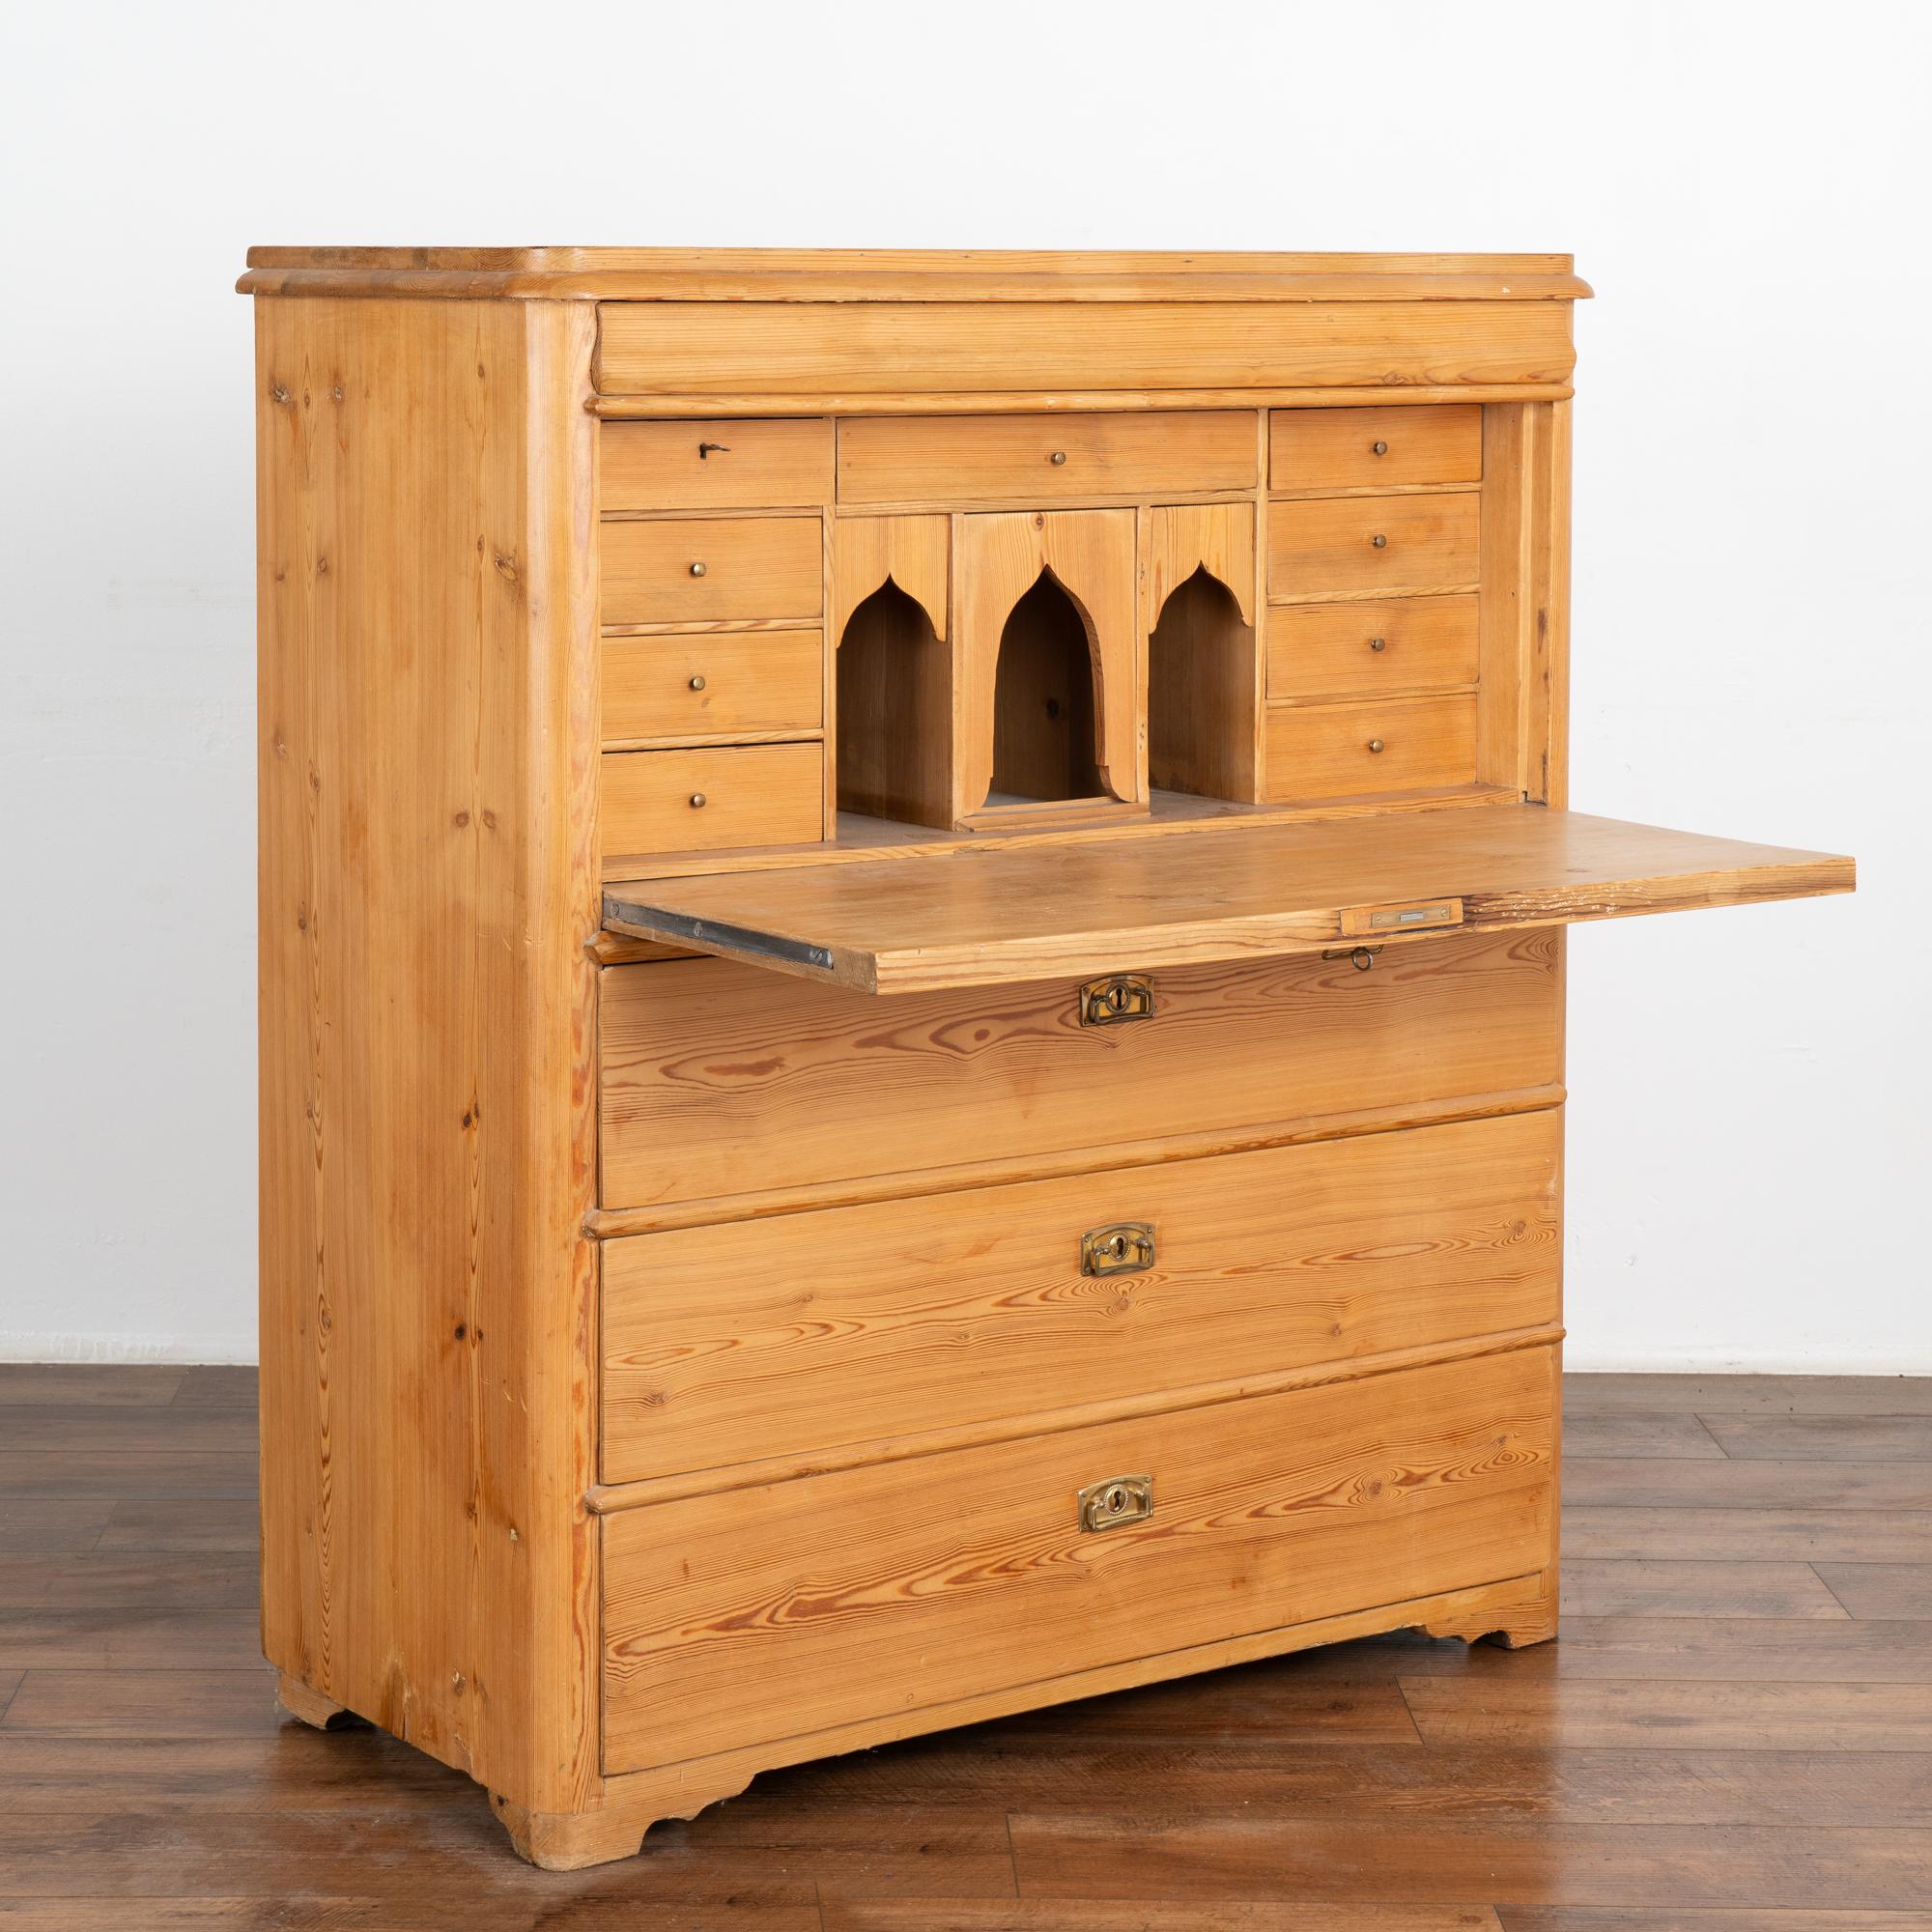 This drop front secretary is charming in every way, with a soft, satin wax finish that compliments the warm patina of the pine and Swedish country styling.
The interior drawers and cubbies create an inviting interior work space. Three functioning